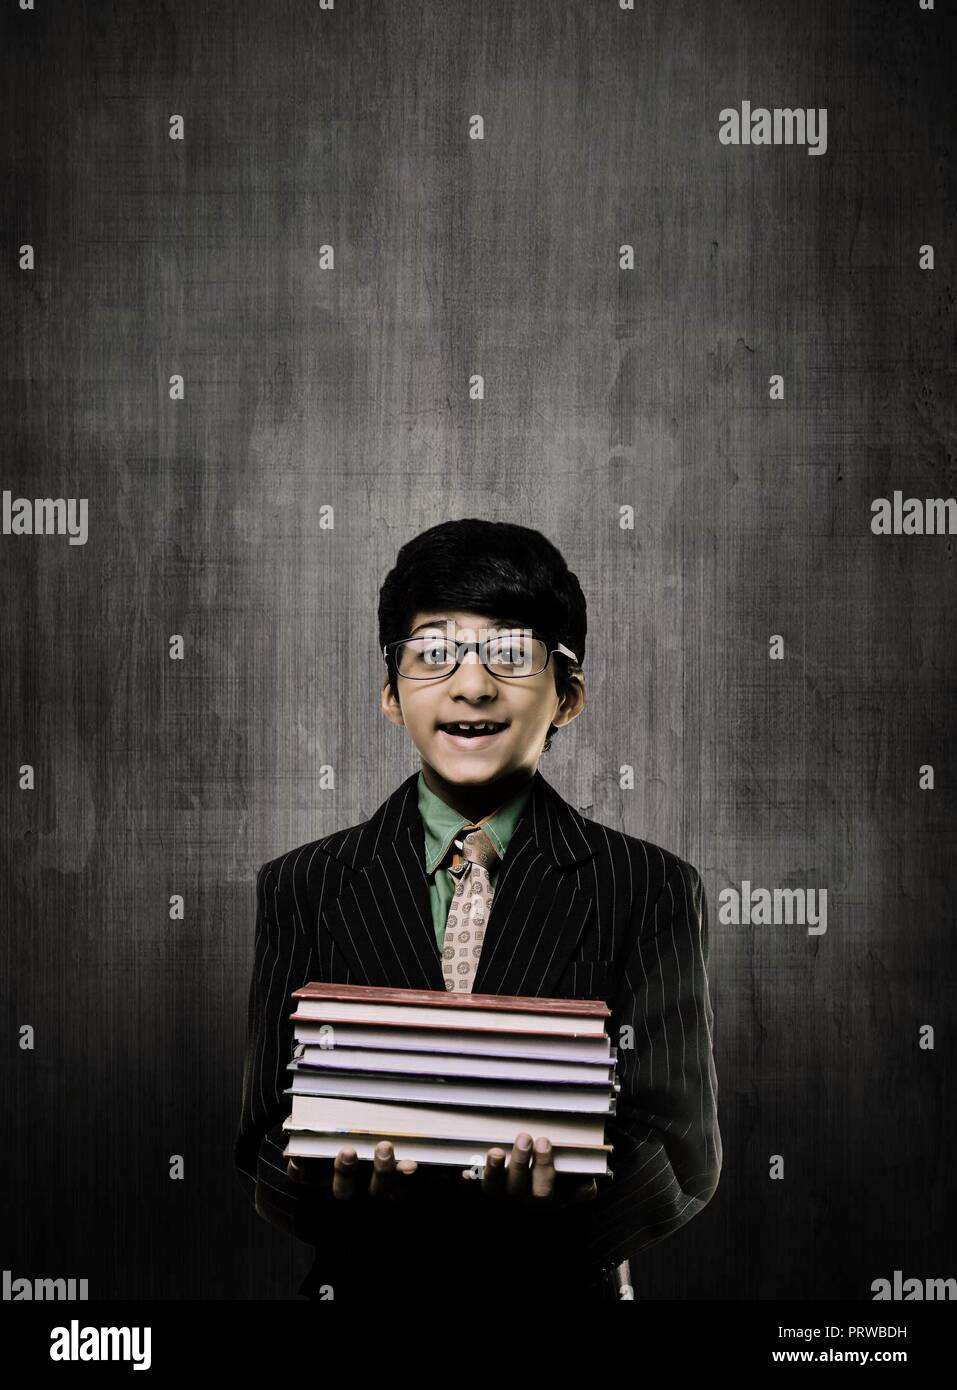 Cute Intelligent Little Boy Holding Books And Wearing Glasses, Smiling While Standing Before A Chalkboard, Stock Photo